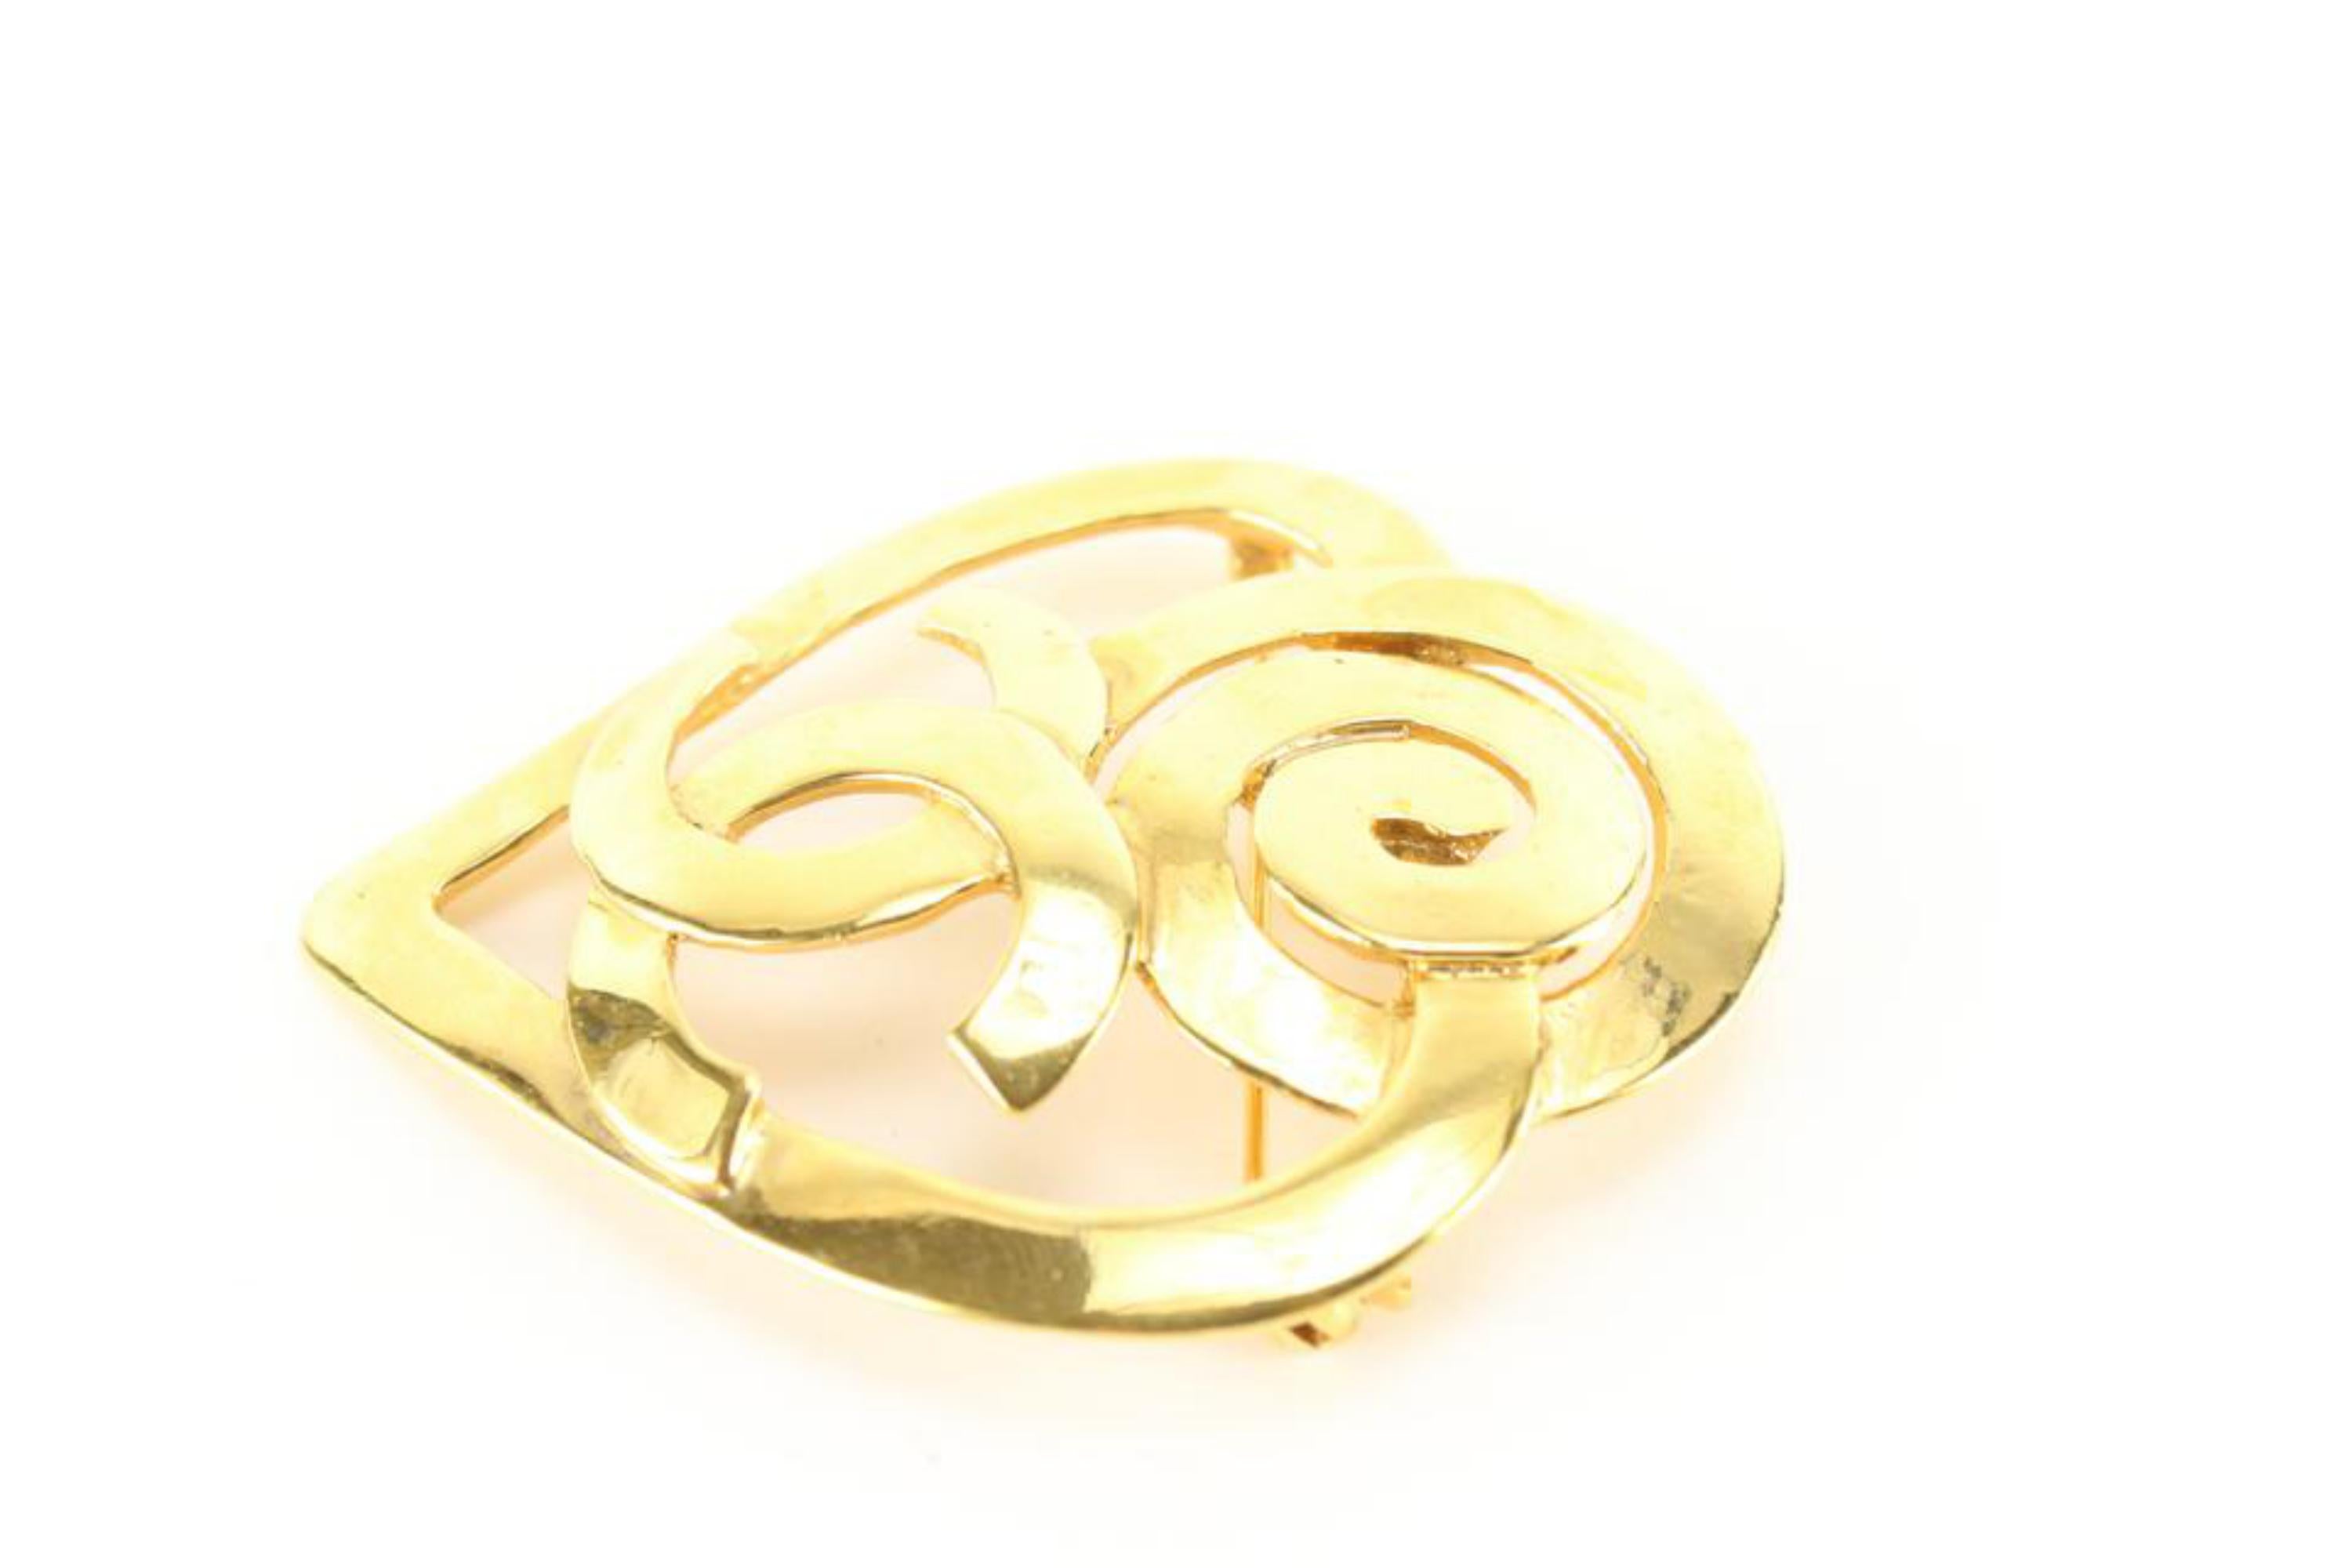 Chanel 95P Spiral Heart CC Brooch Pin Corsage 29ck824s